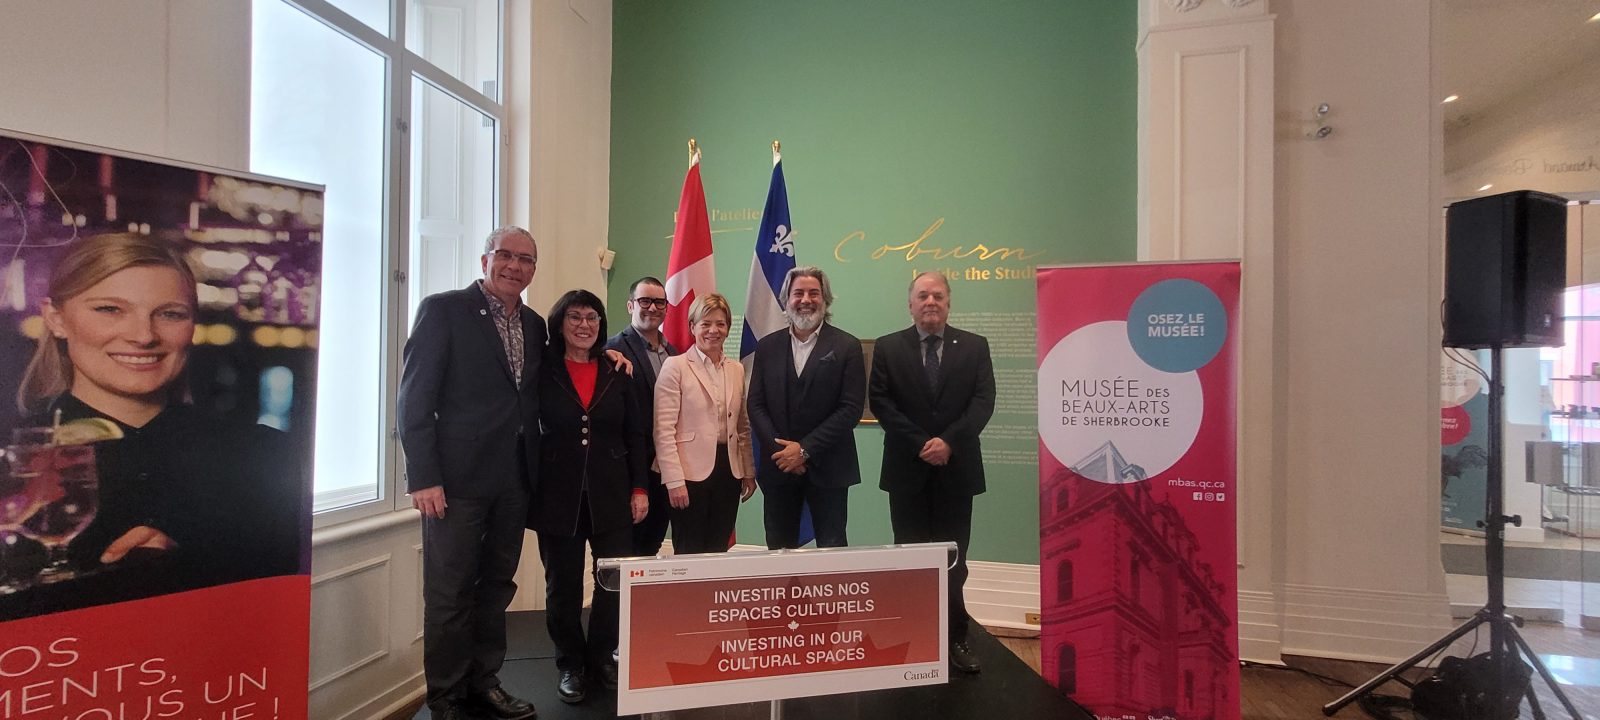 Minister of Canadian Heritage announces funding for repairs and upgrades to Musée des beaux-arts & Théâtre Granada